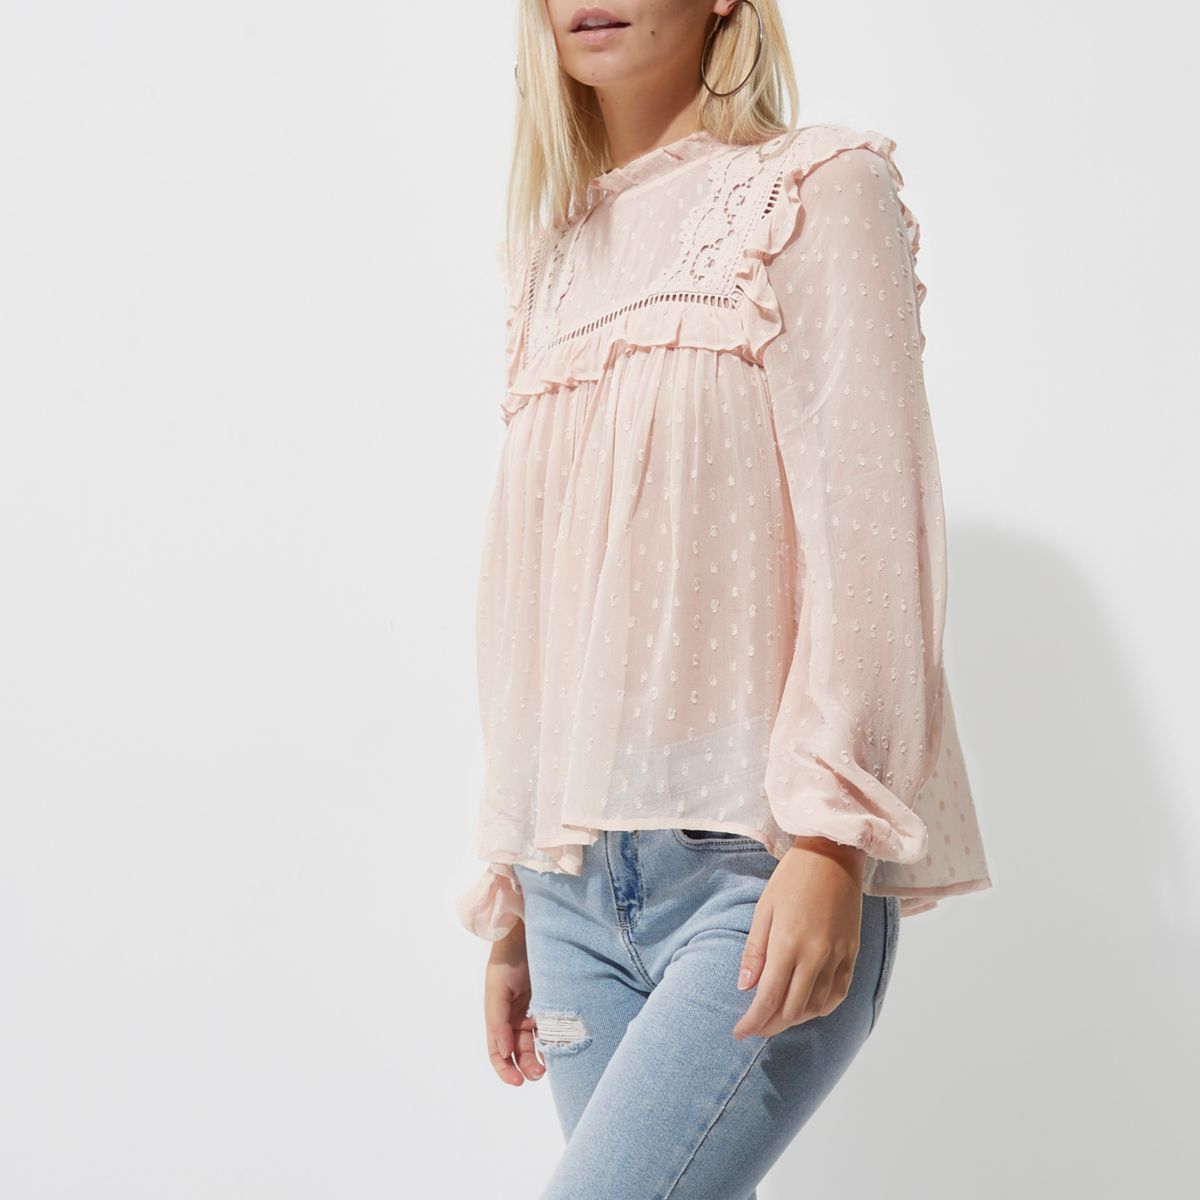 Petite light pink dobby mesh embroidered top - Tops - Sale - women